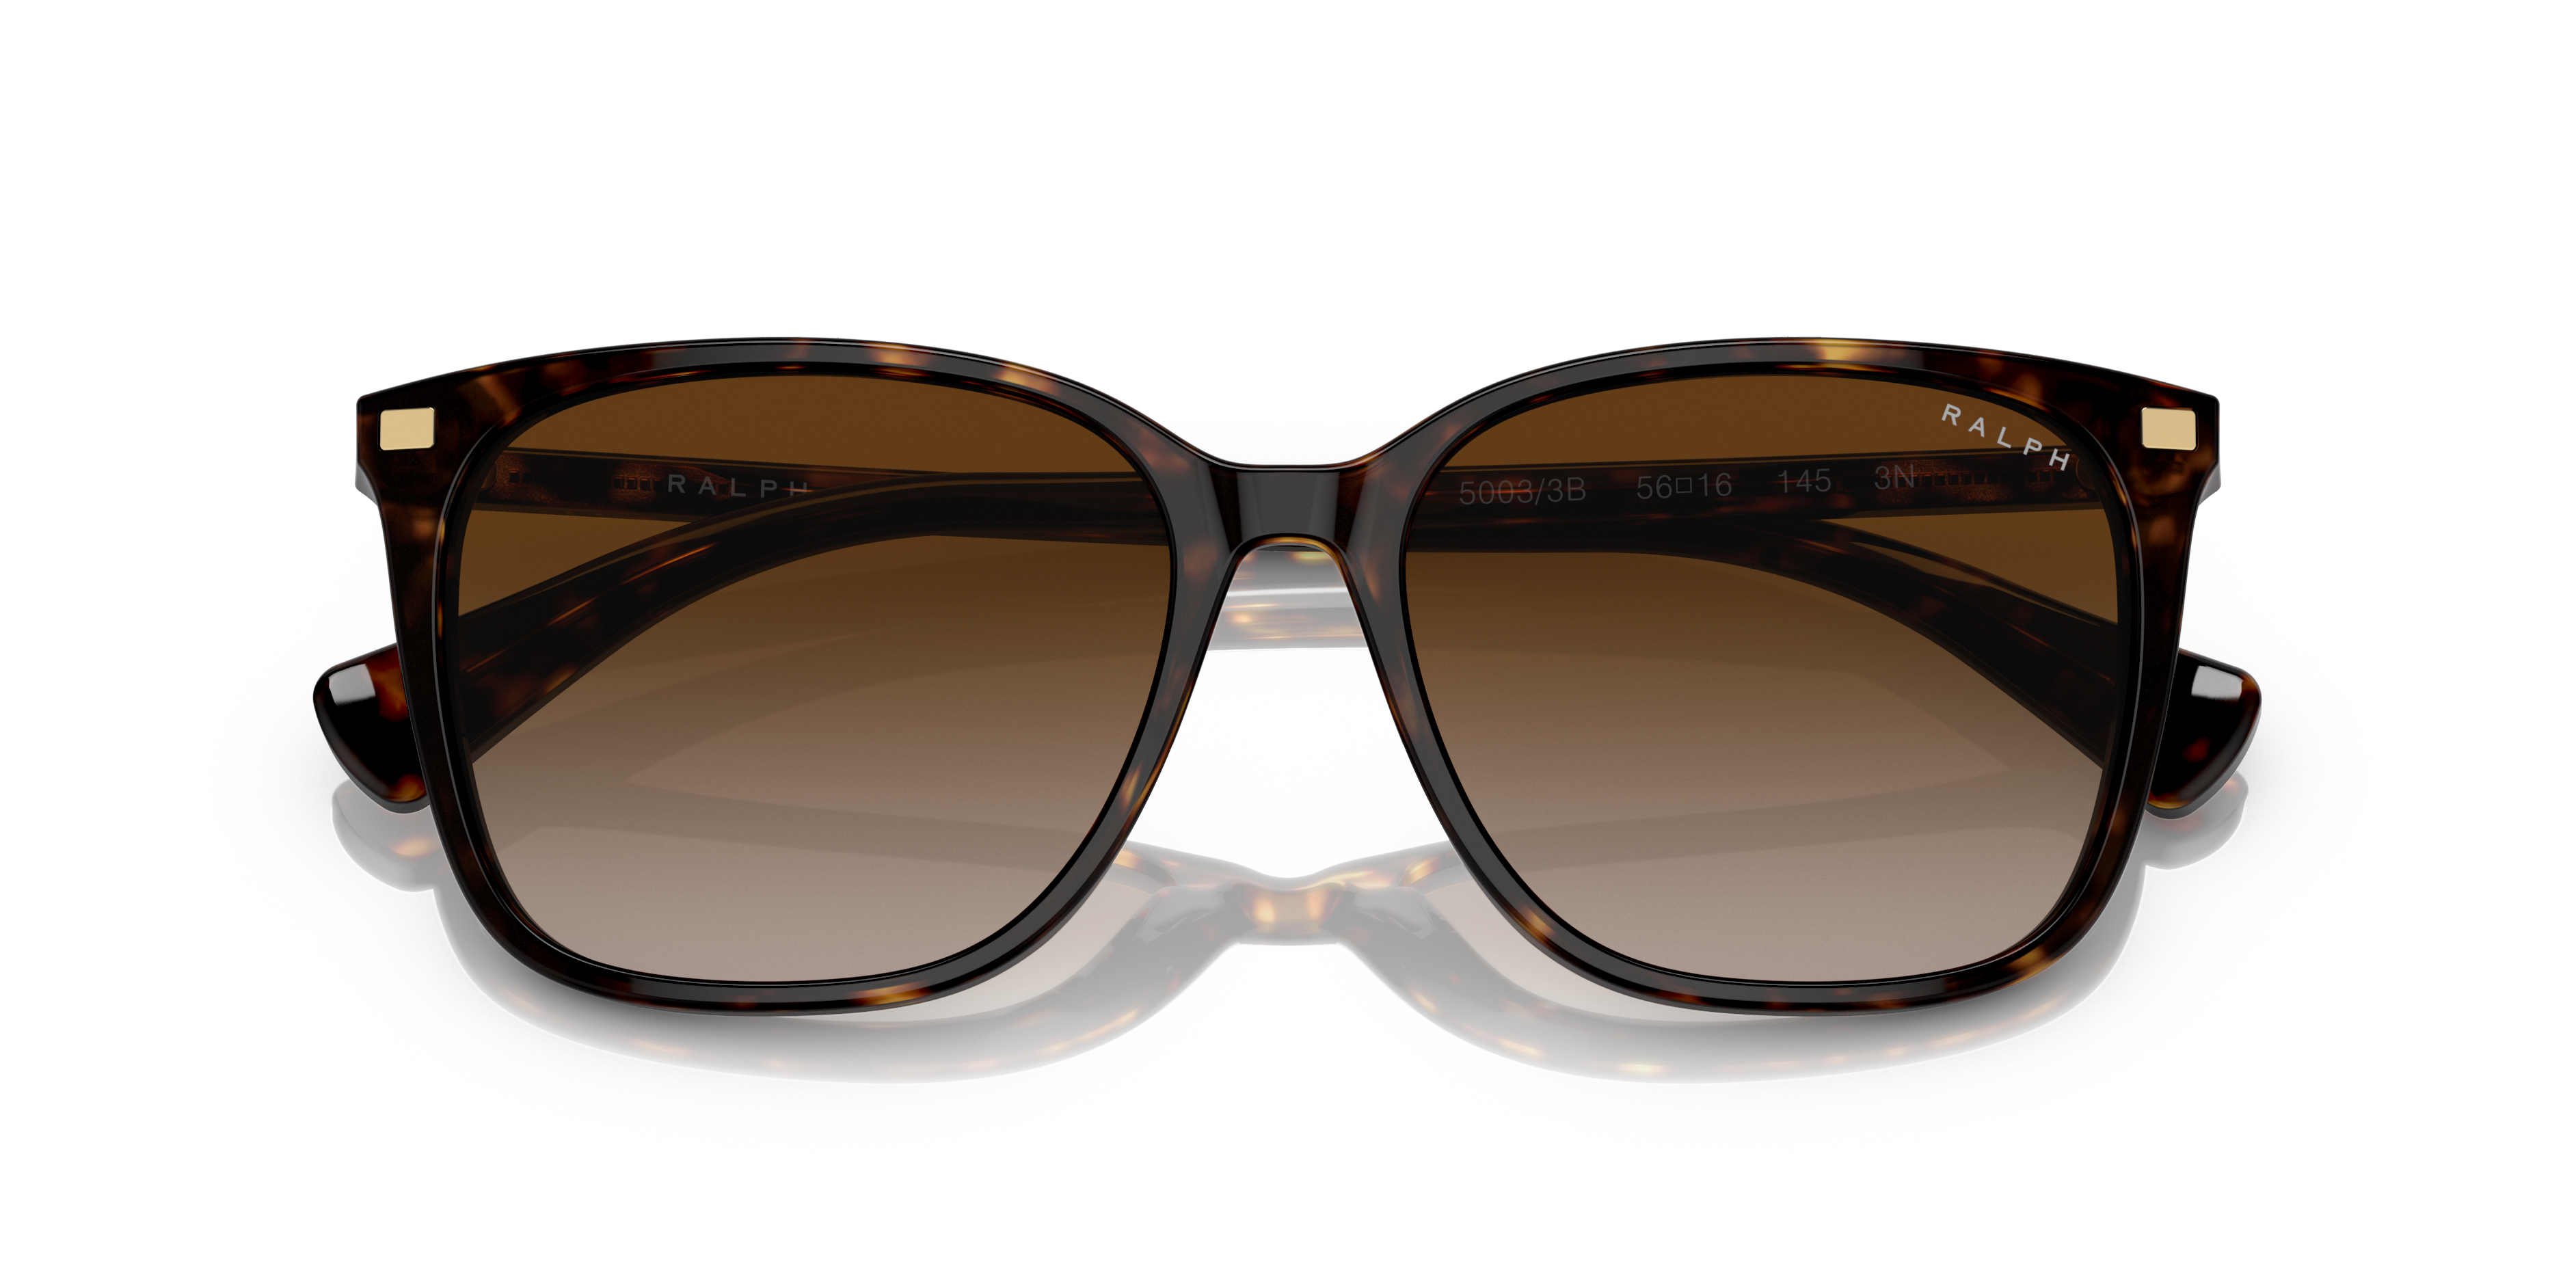 [products.image.folded] Ralph by Ralph Lauren RA 5293 Sunglasses